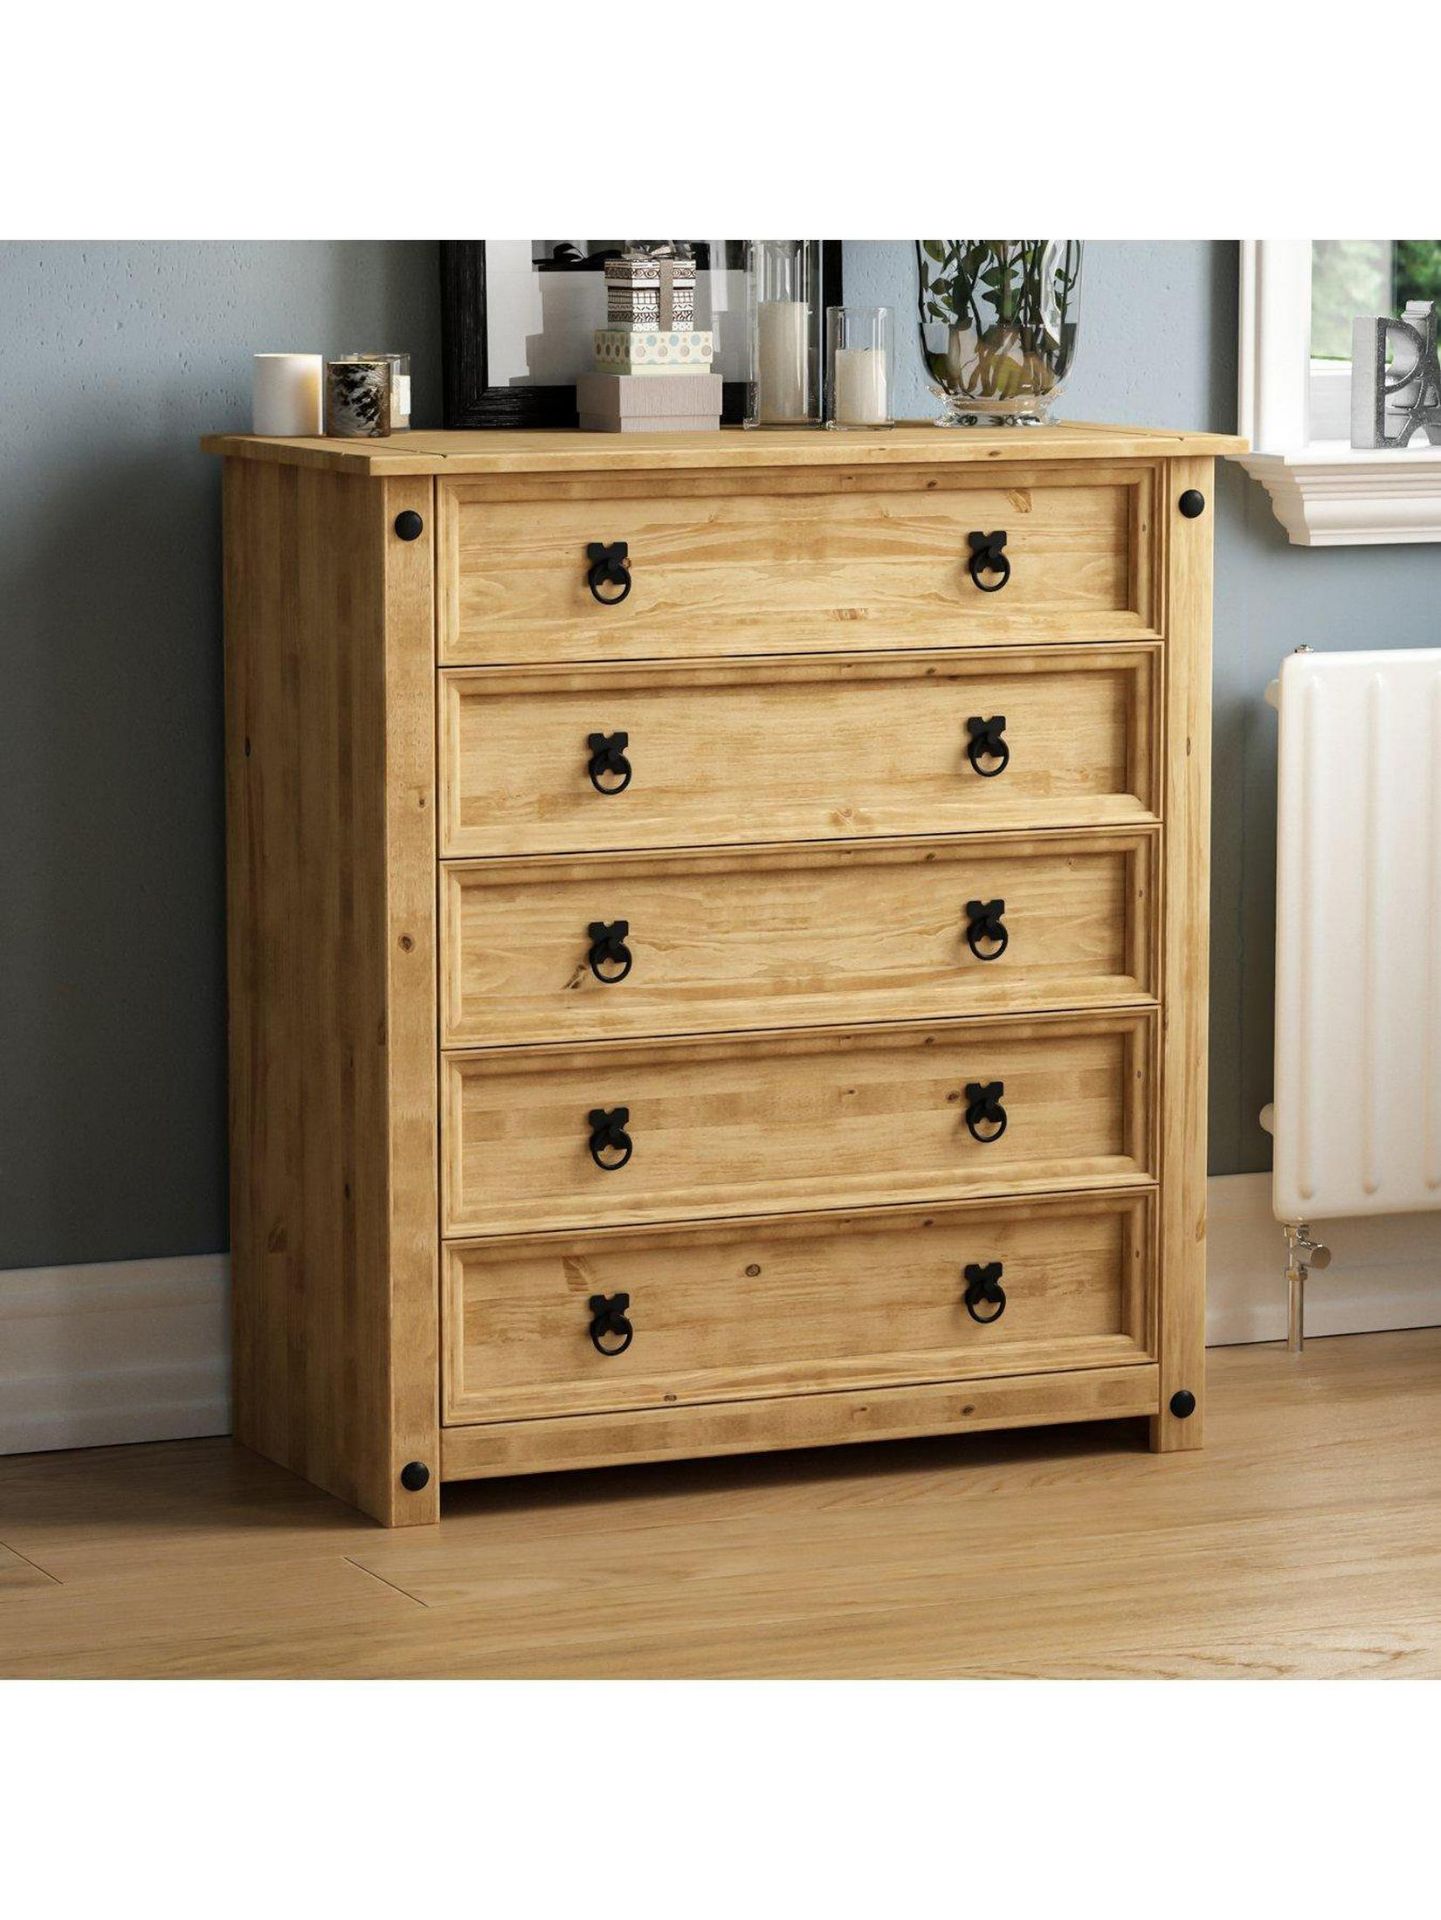 CORONA RUSTIC 5 DRAWER CHEST RRP £159 - Image 2 of 2